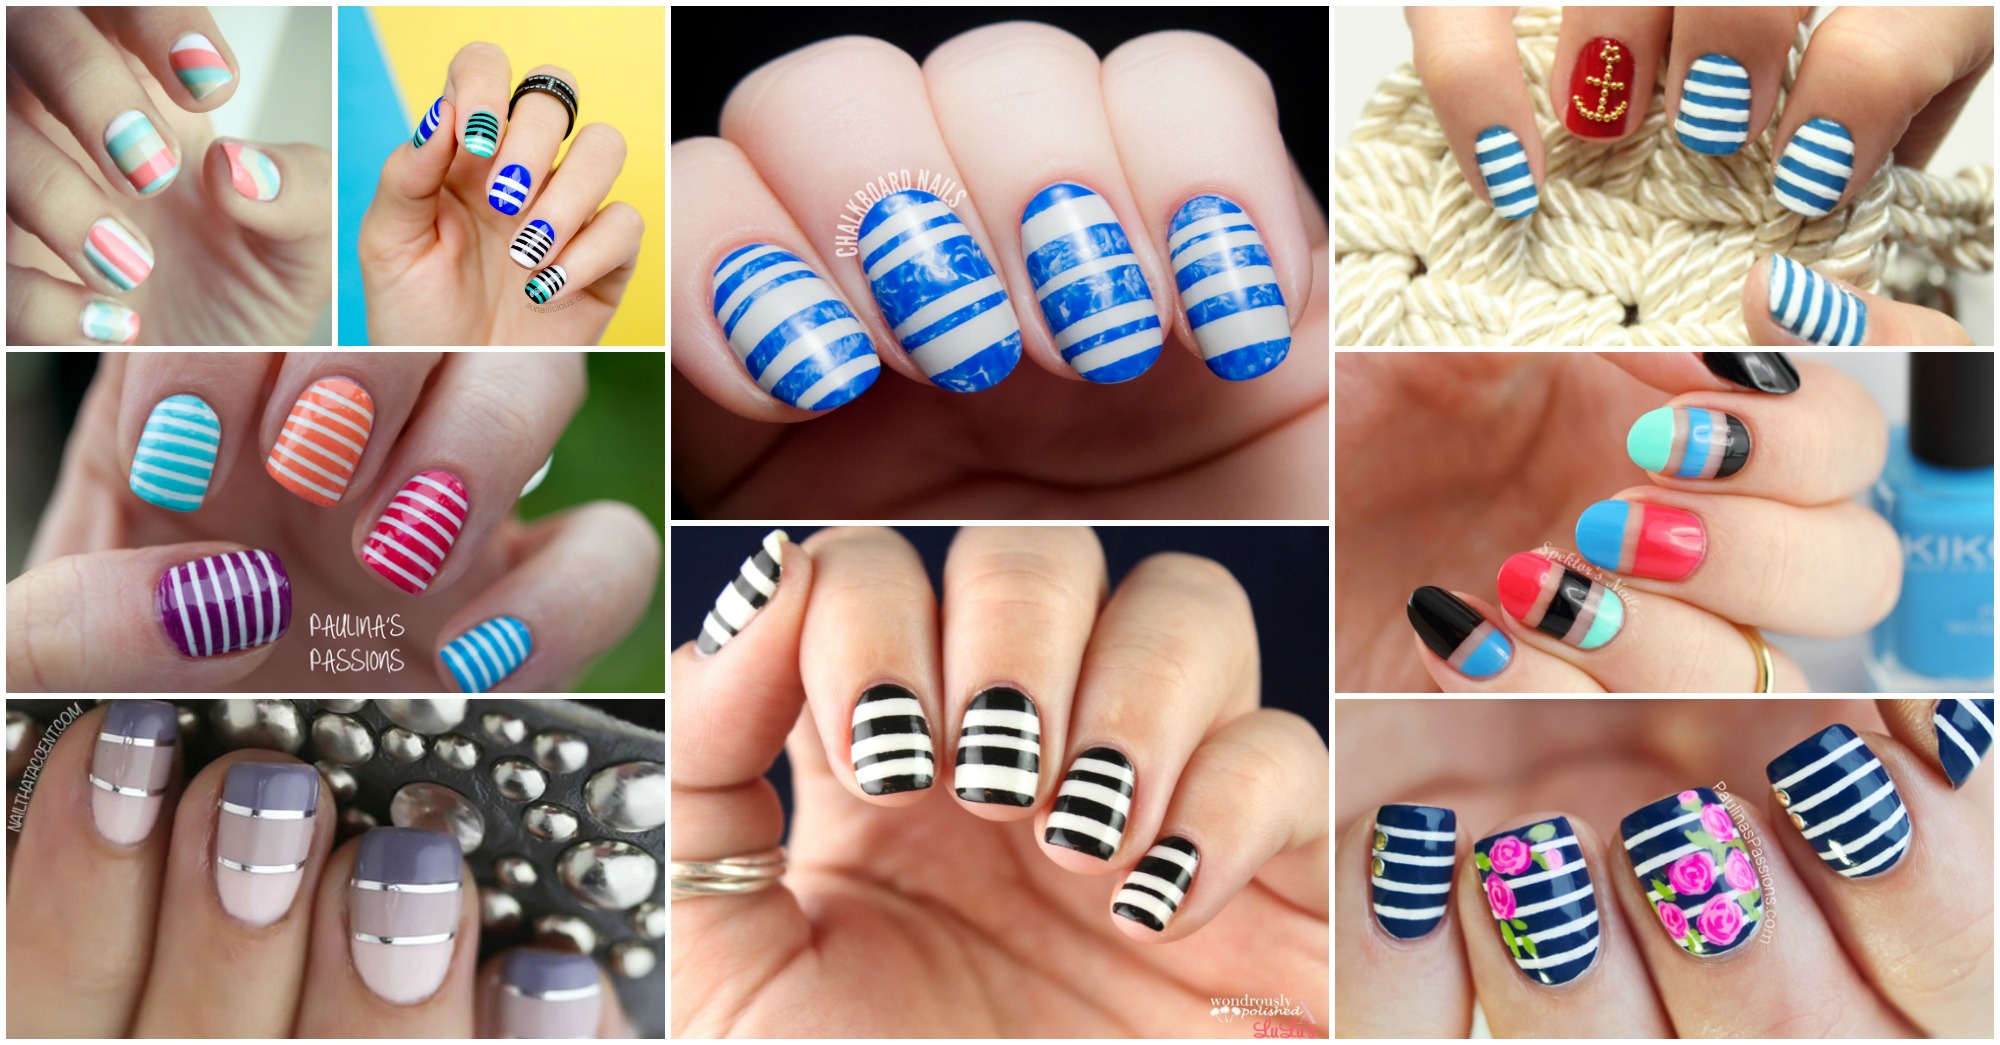 9. Black and White Striped Nail Designs on Tumblr - wide 2